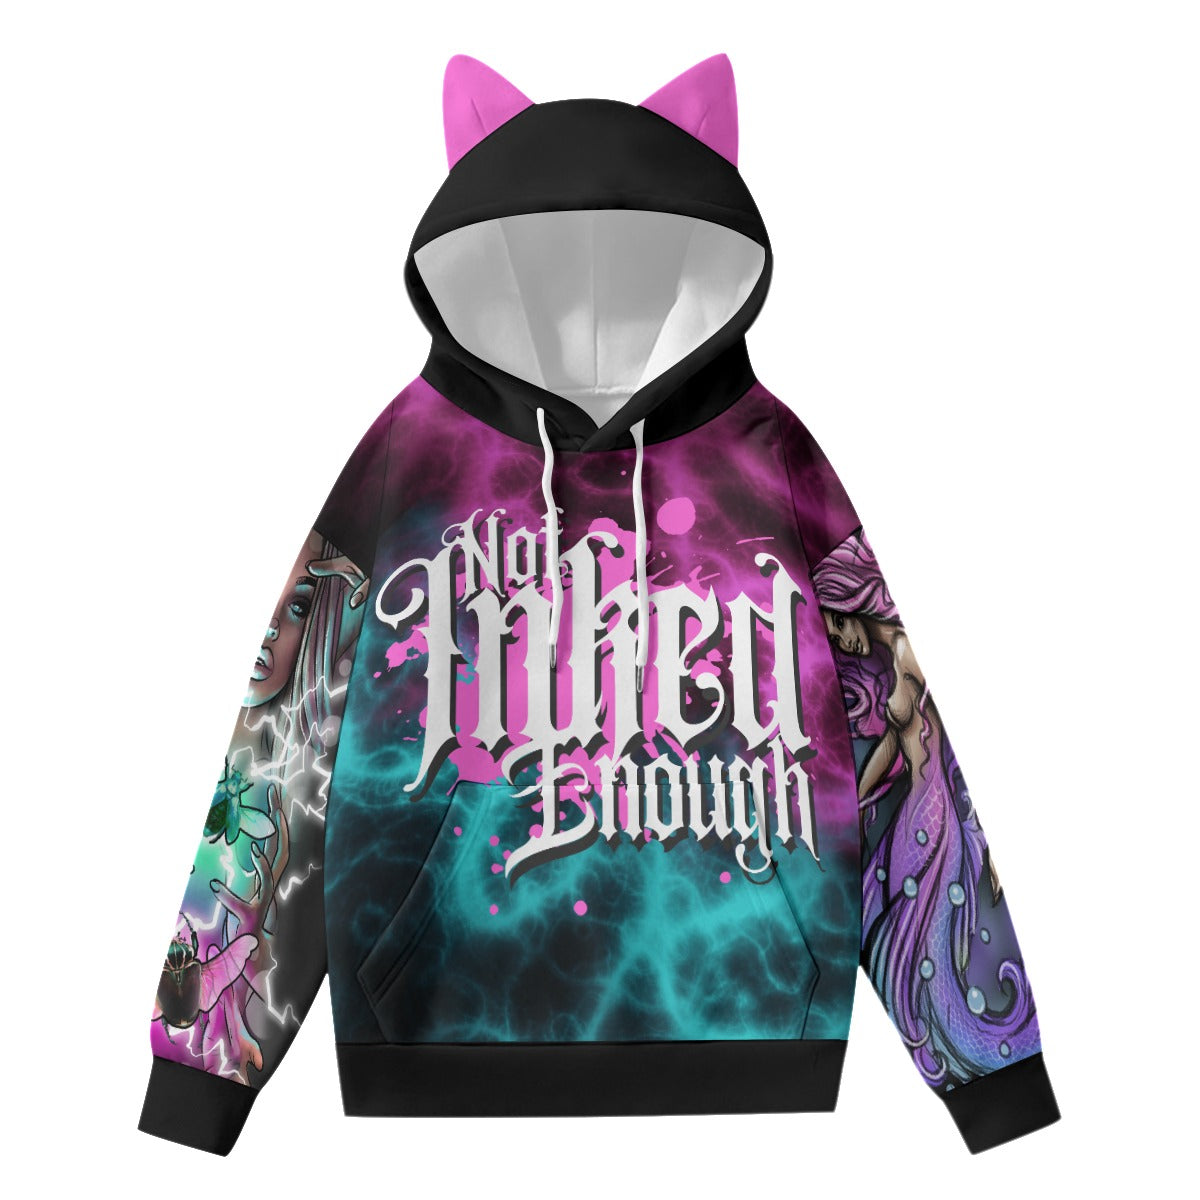 All-Over Print Women’s Hoodie With Decorative Ears - Electric Linda